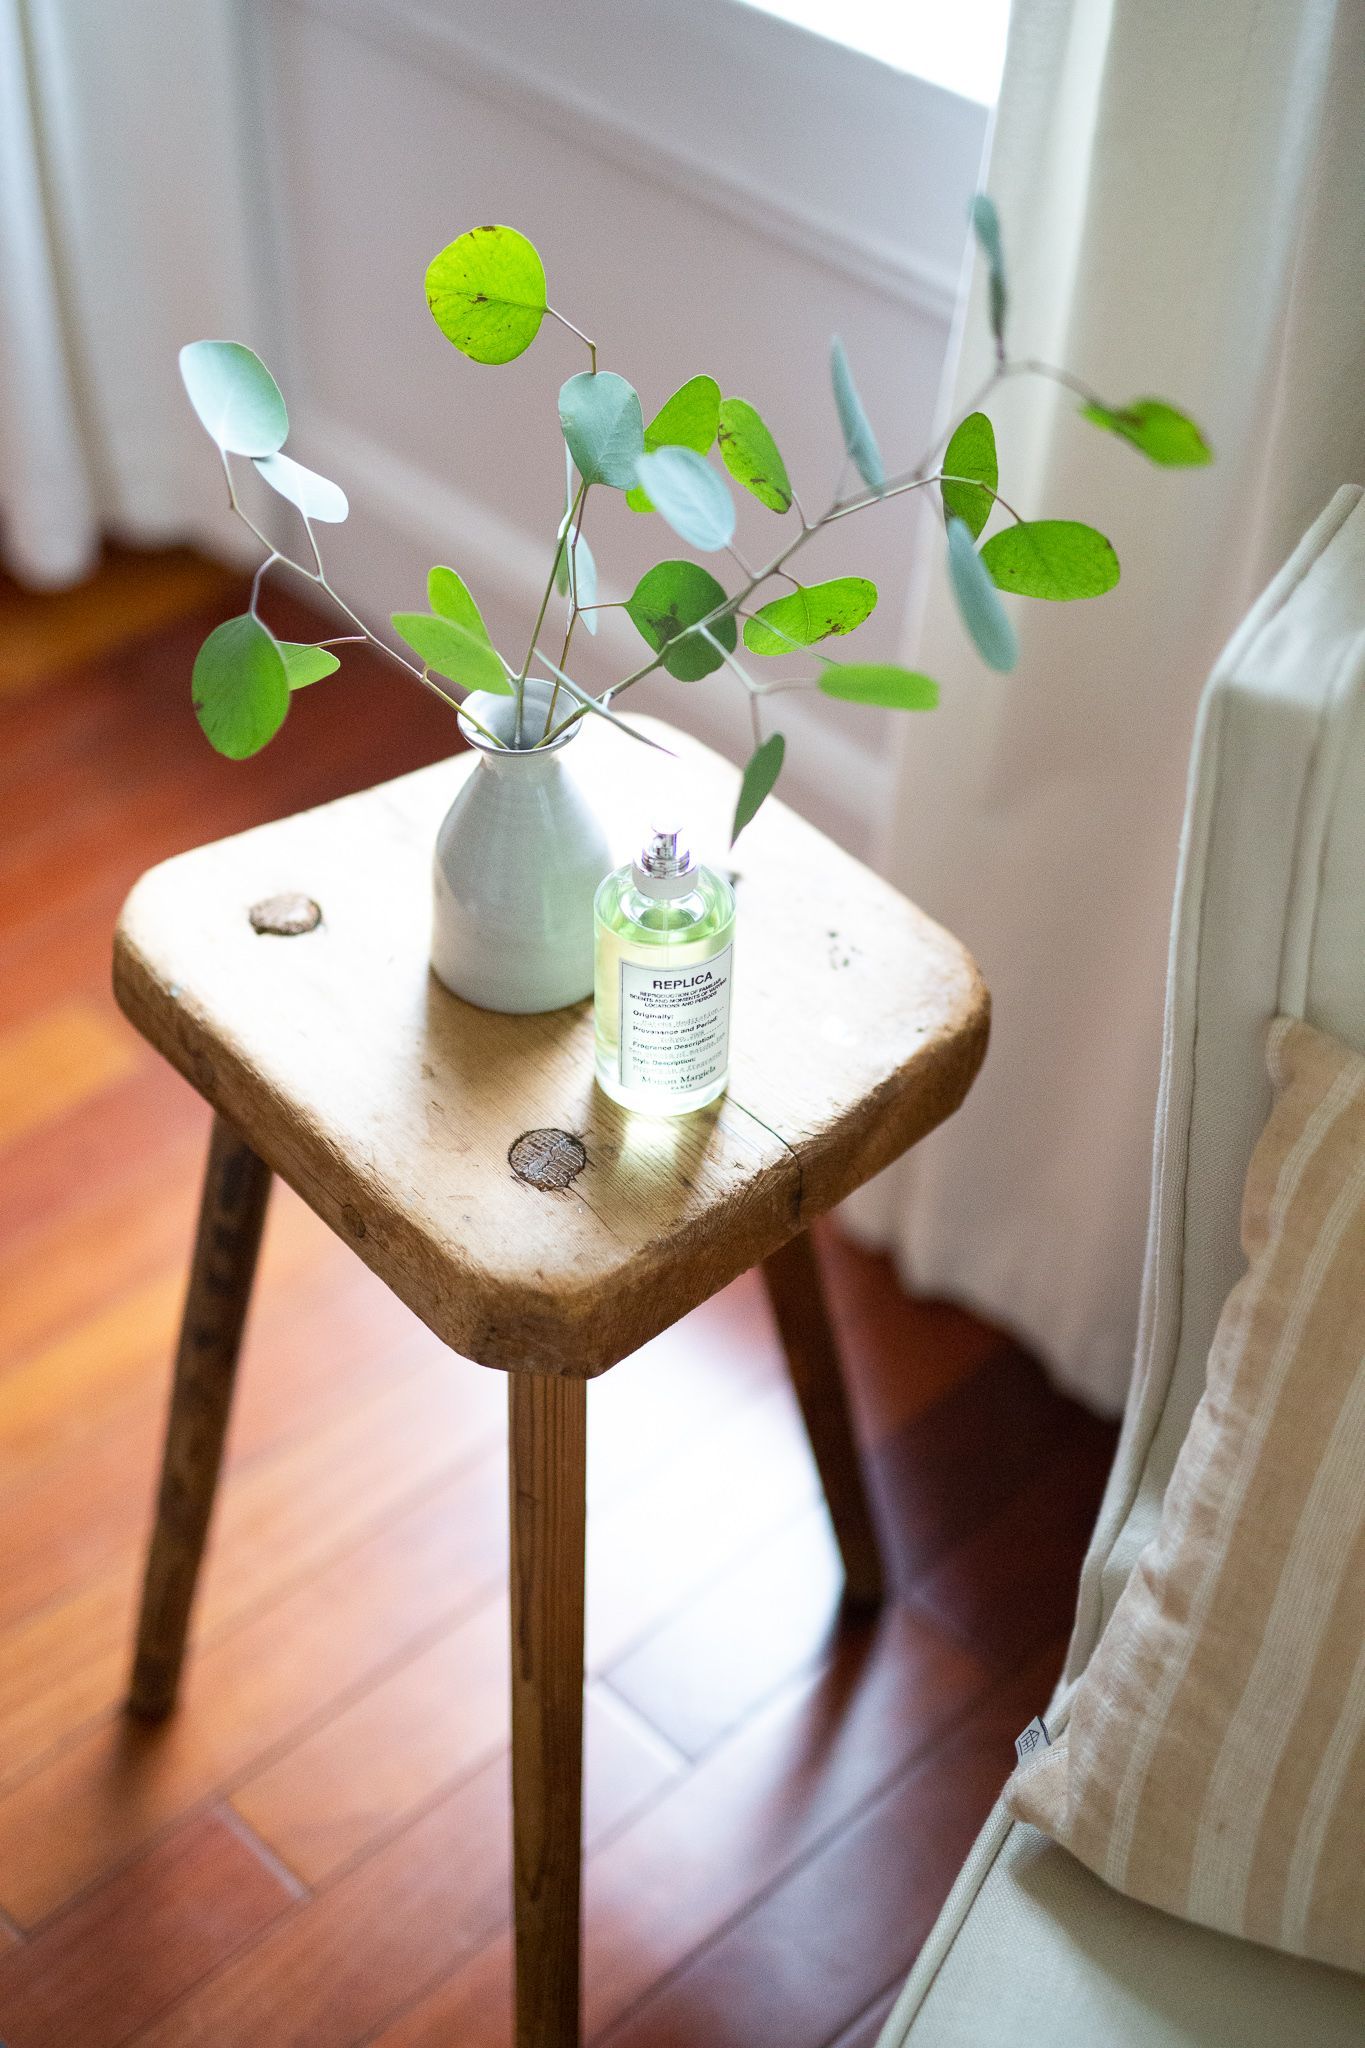 bottle of perfume sitting on wooden stool with vase of green leaves, chair and pillow in foreground